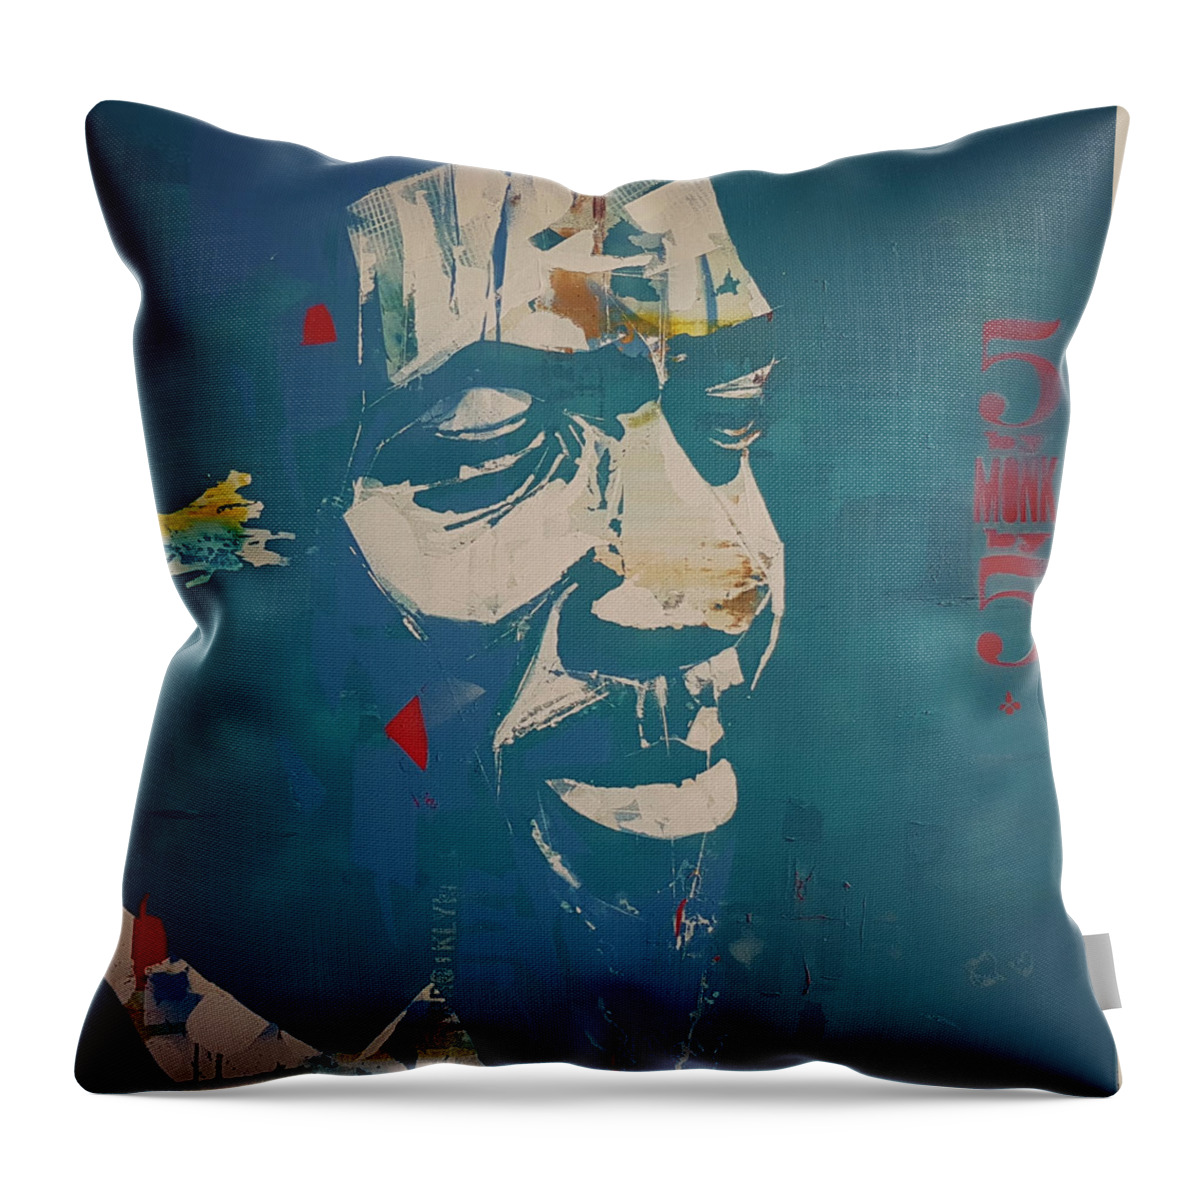 Jazz Art Throw Pillow featuring the painting Thelonious Monk by Paul Lovering